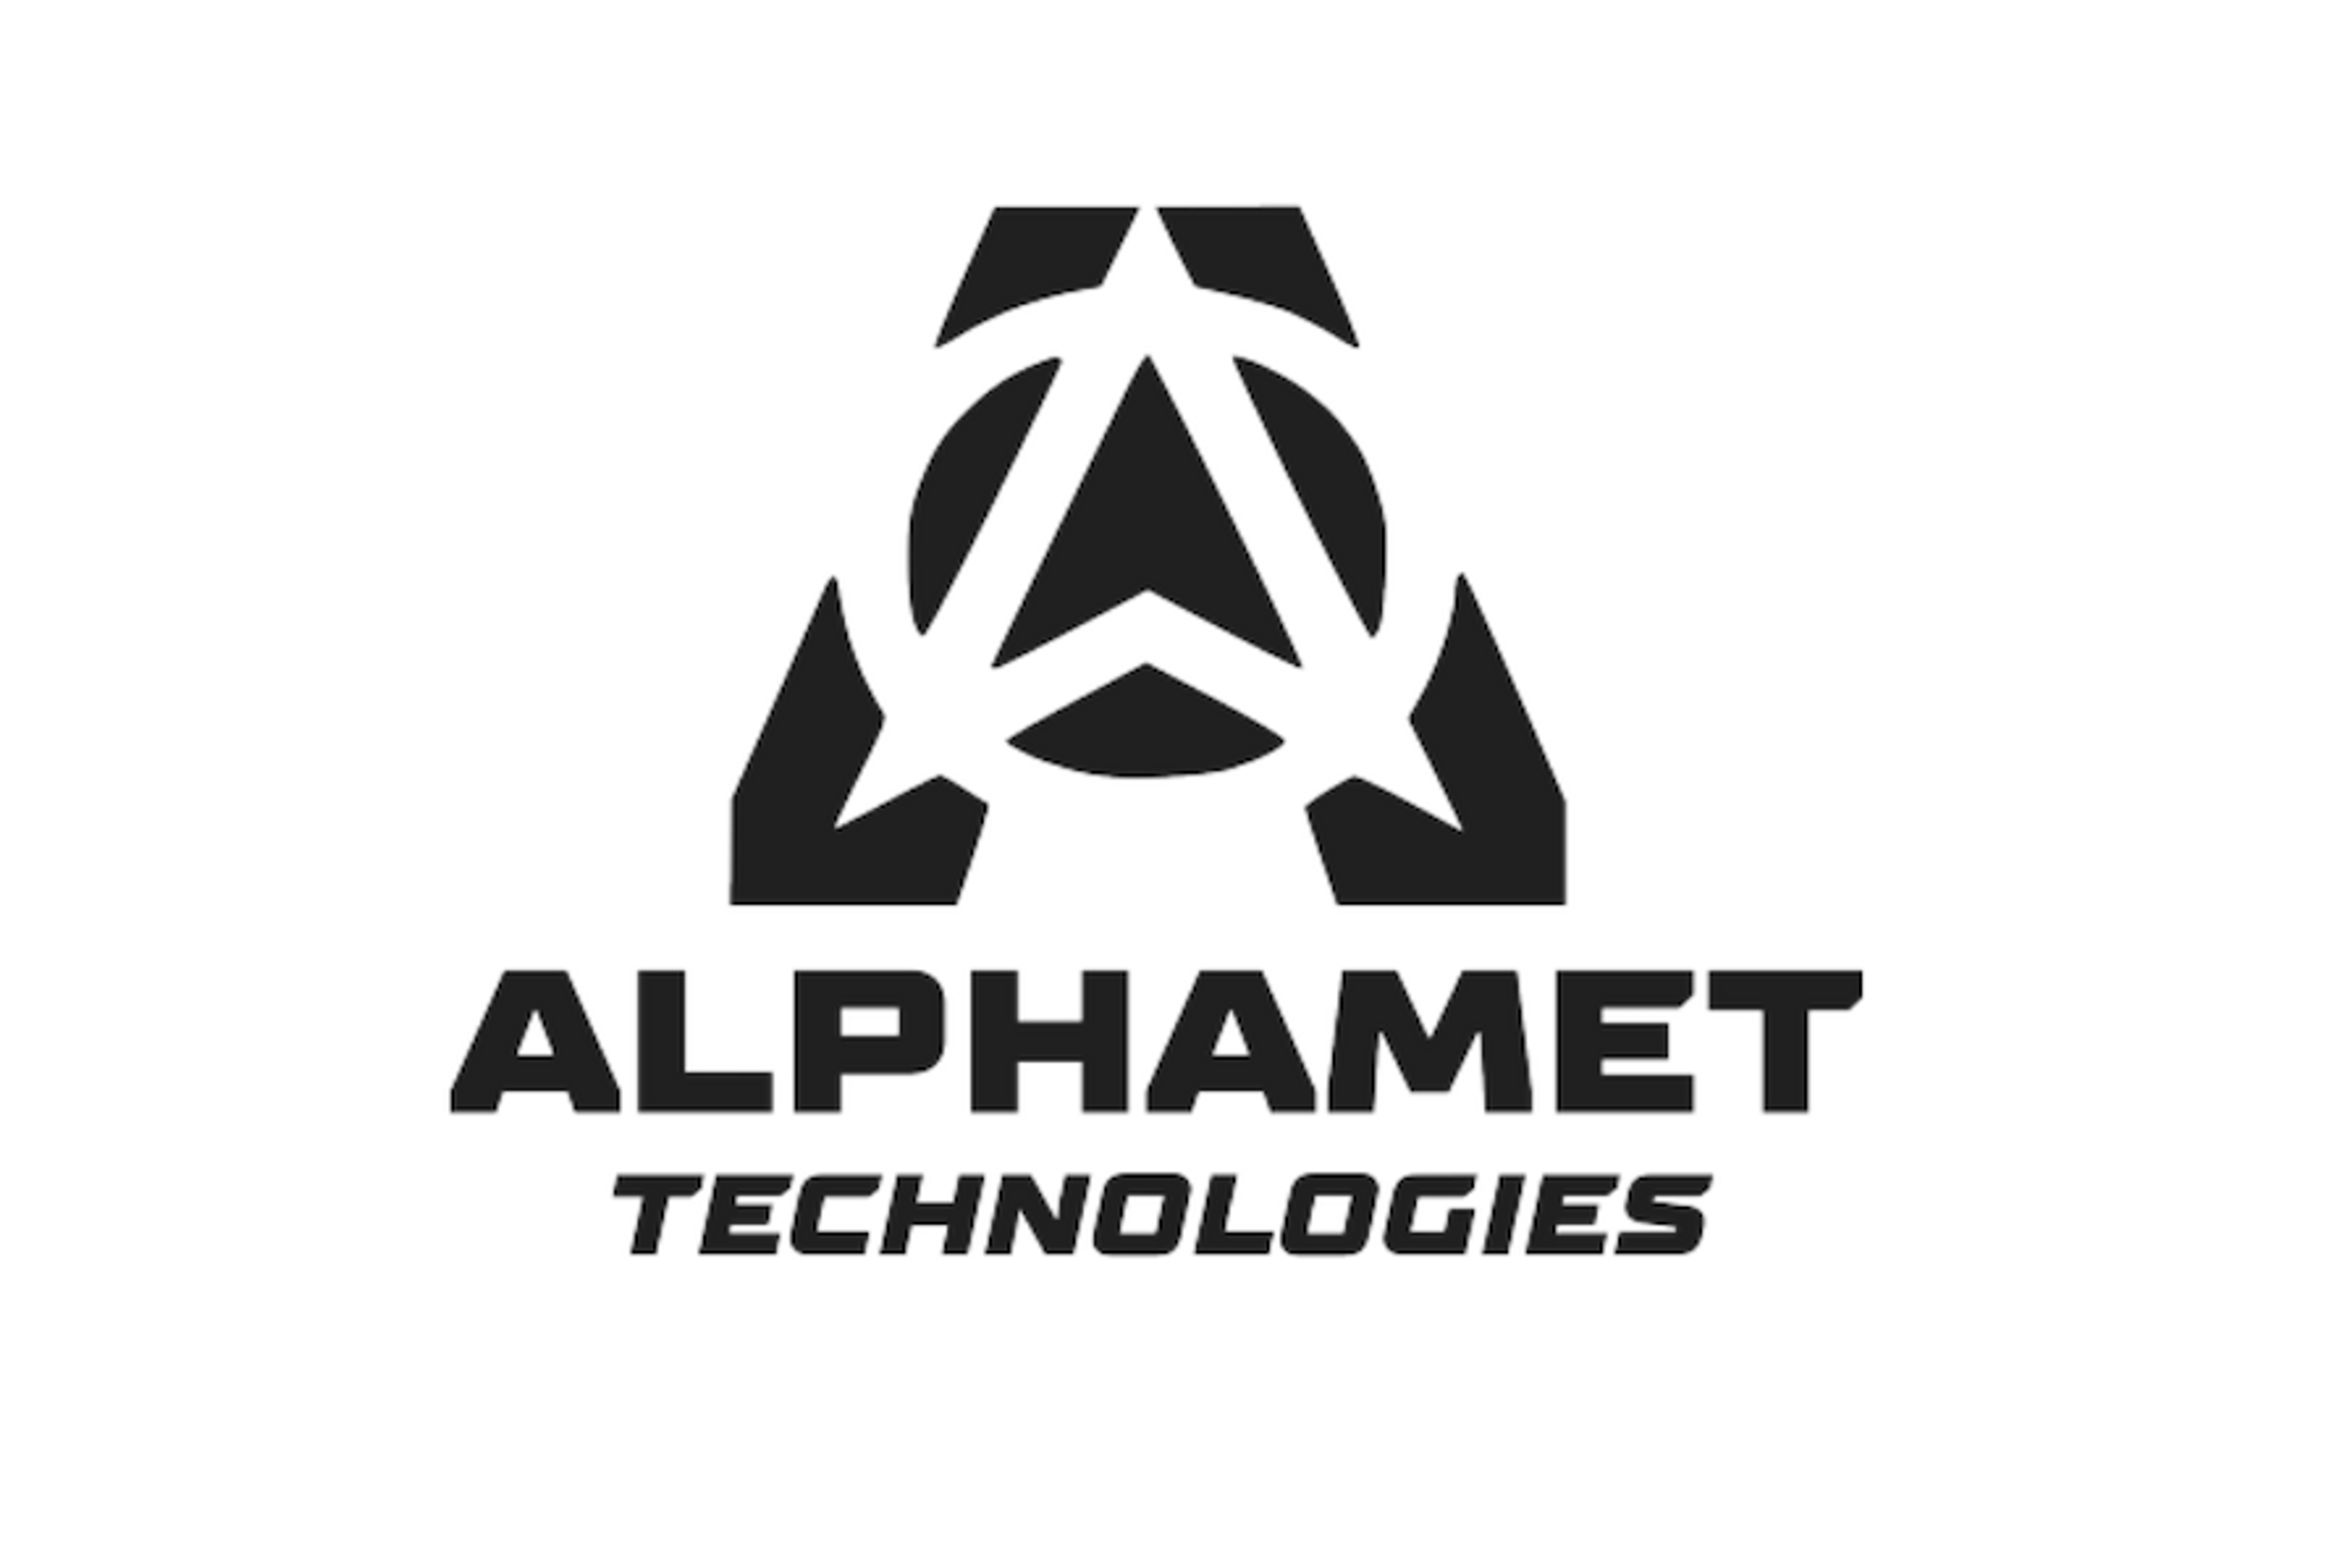 Alpha Metaverse Technologies Announces First Tranche Closing of $2,780,125 Brokered Private Placement